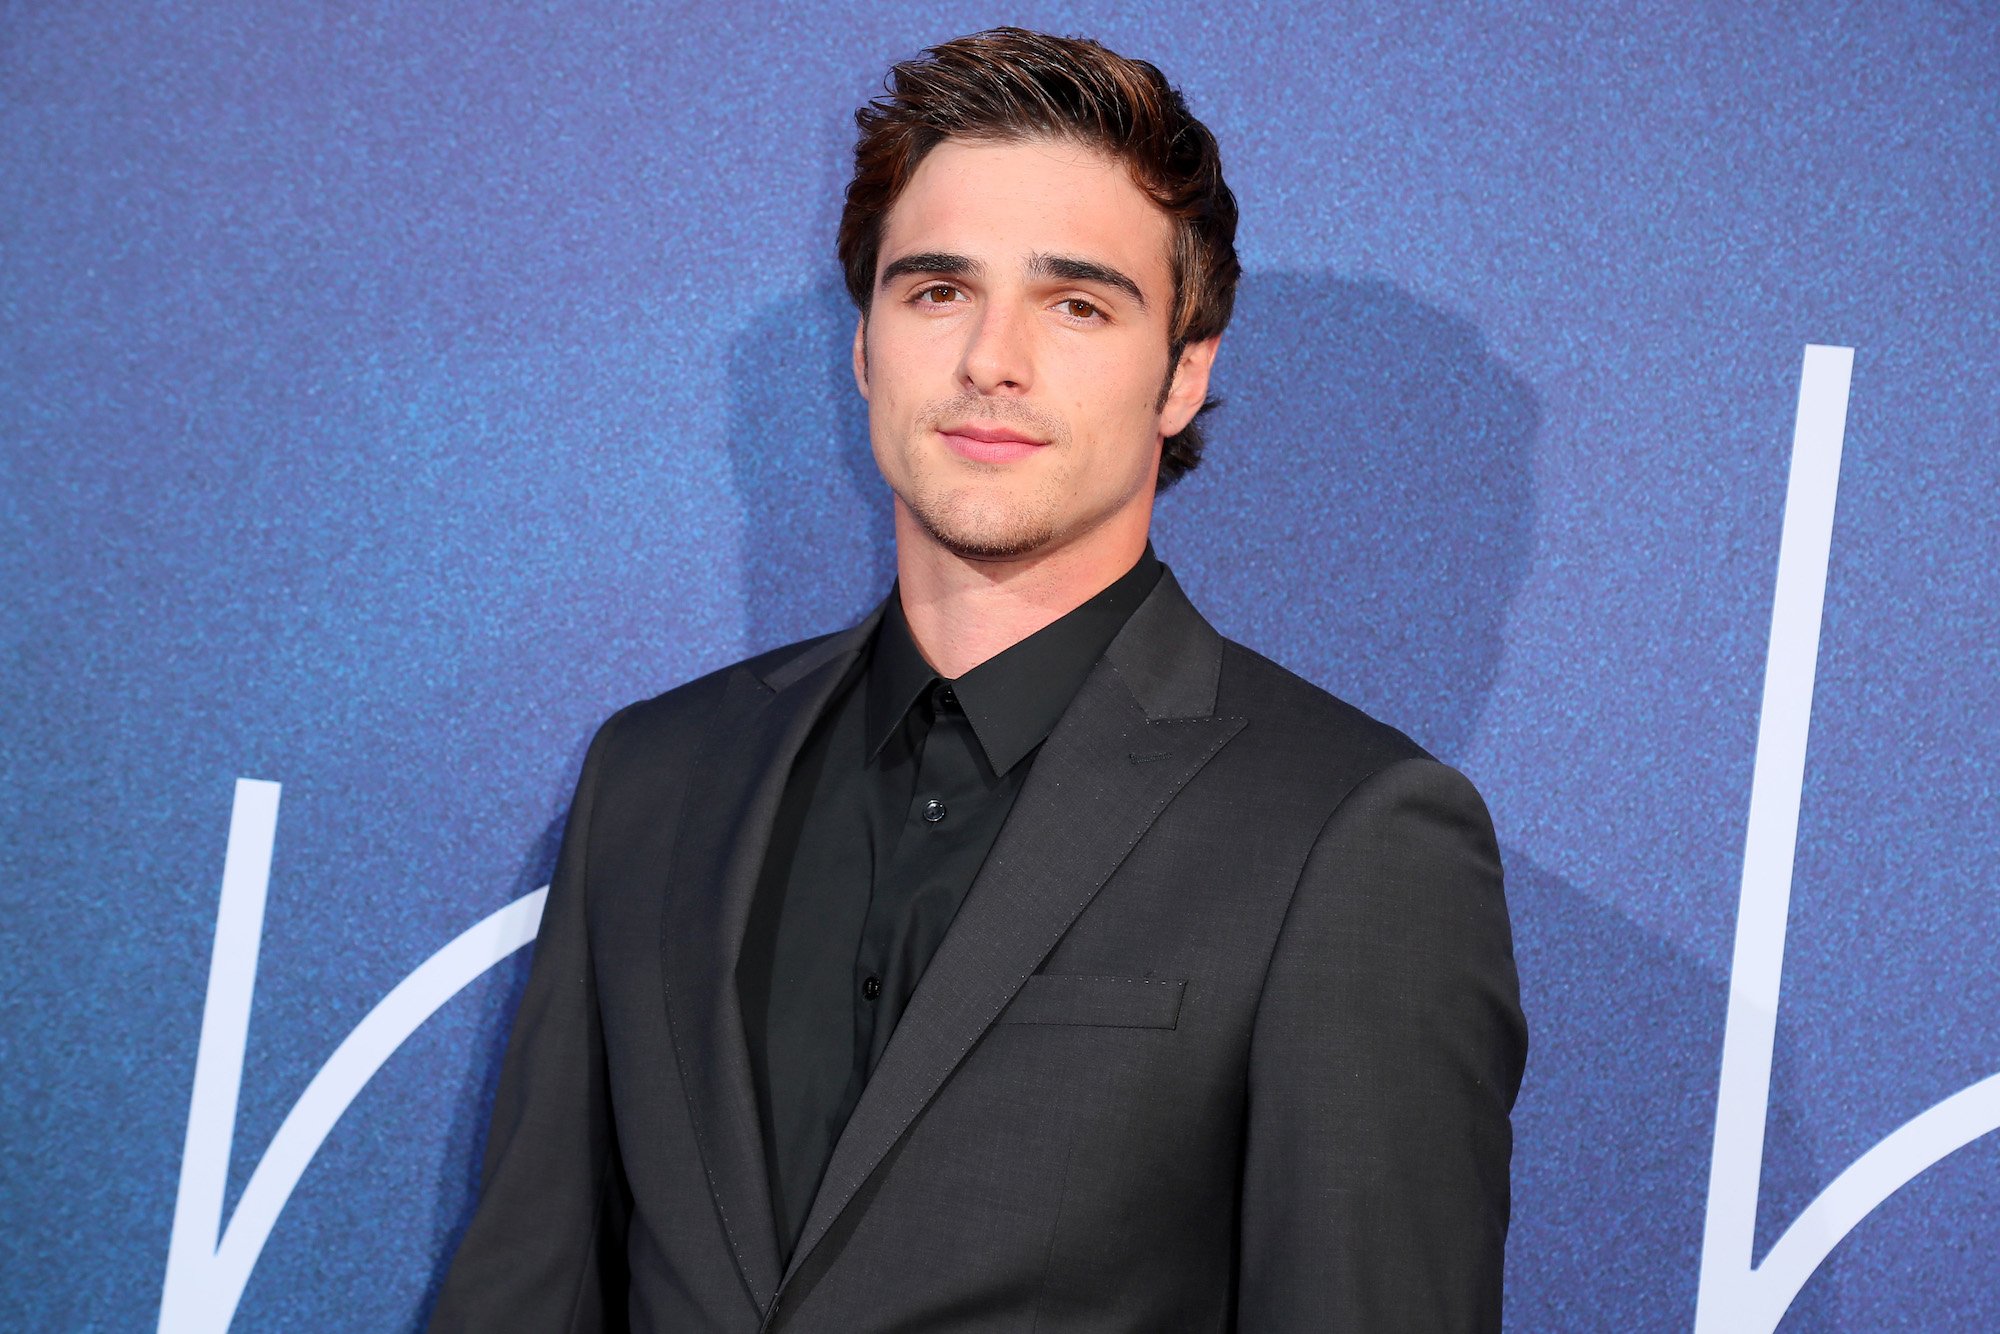 Jacob Elordi at the LA Premiere of HBO's 'Euphoria' on June 04, 2019